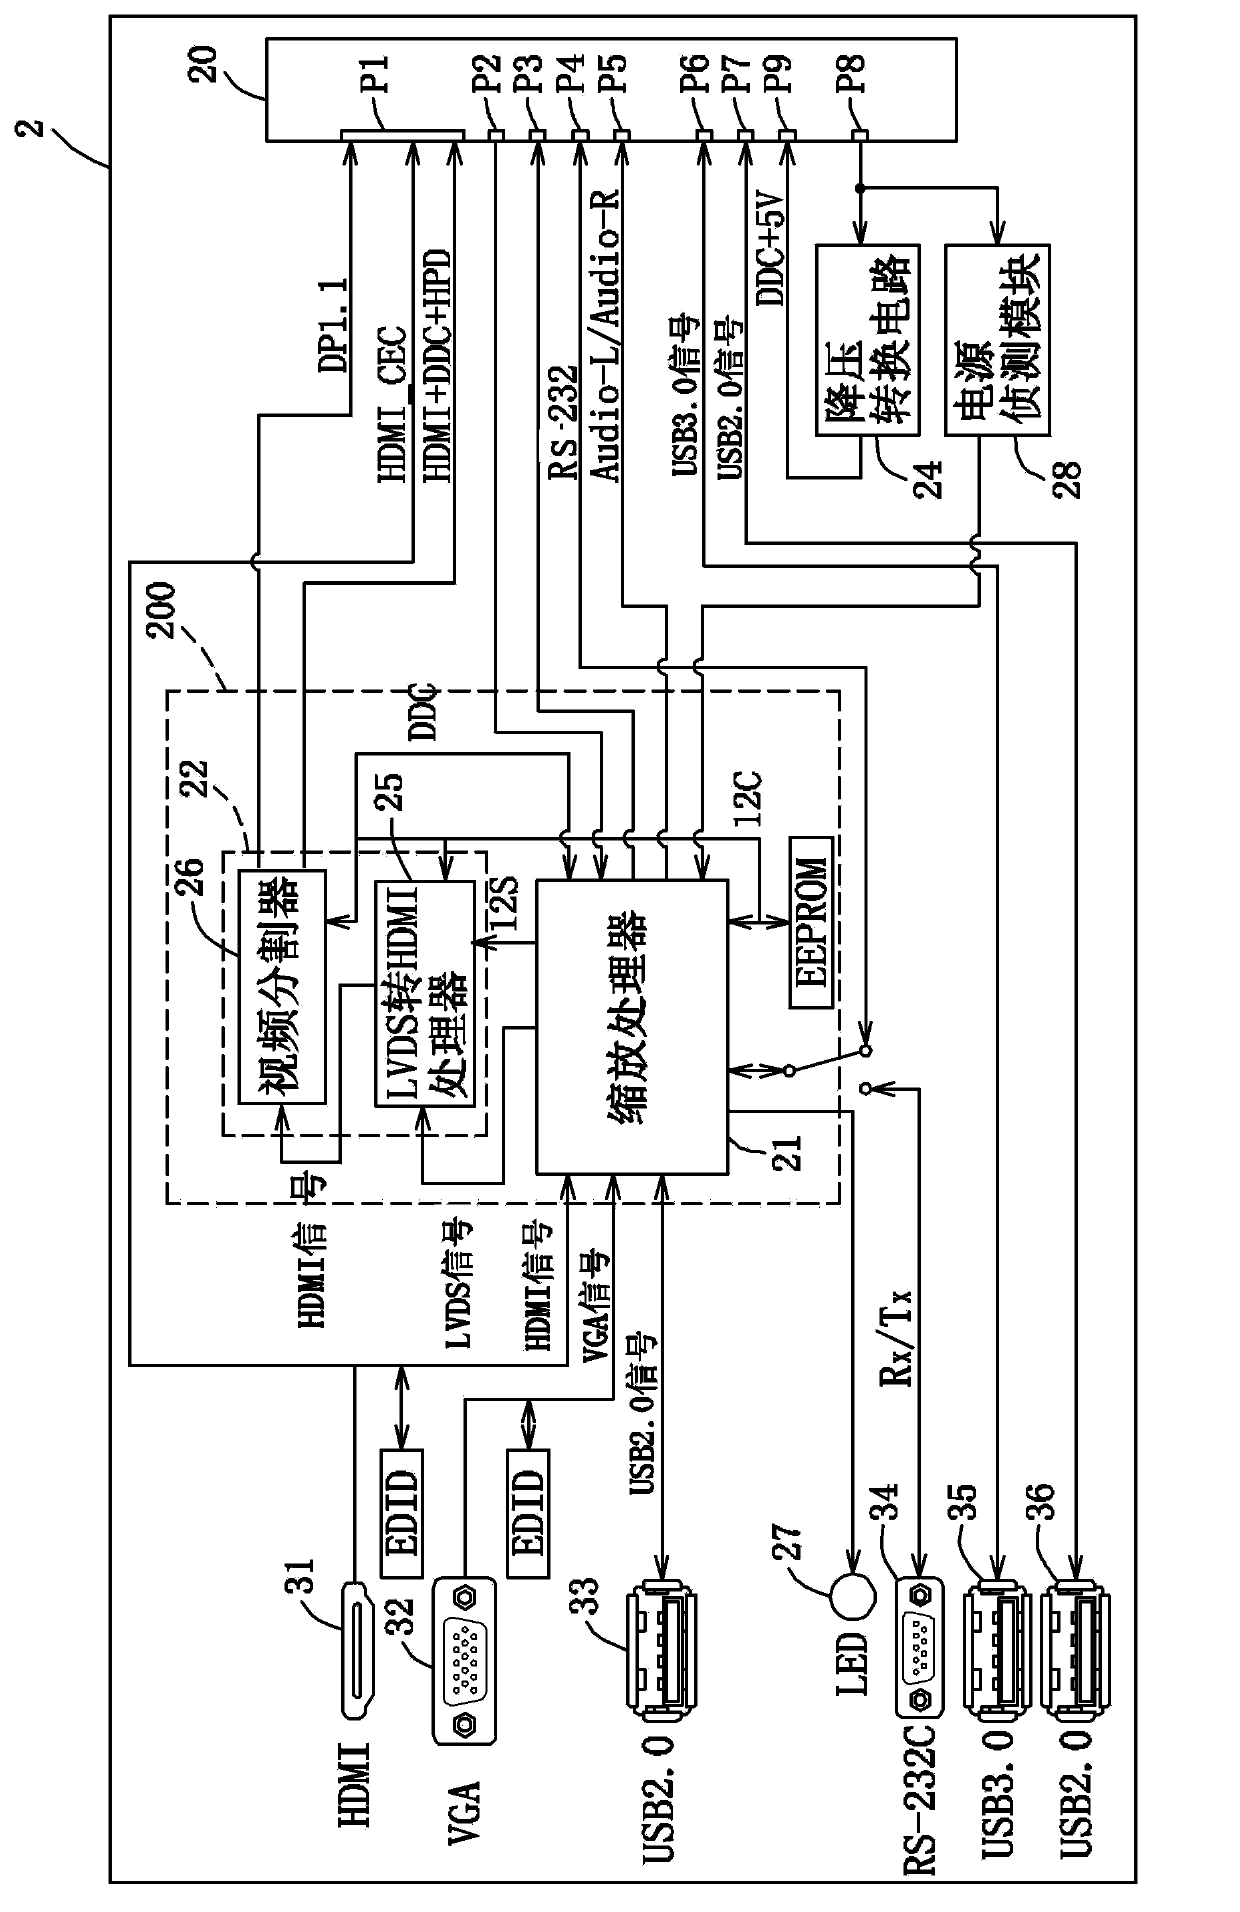 Method and jig for automatically detecting open pluggable interfaces of video output devices